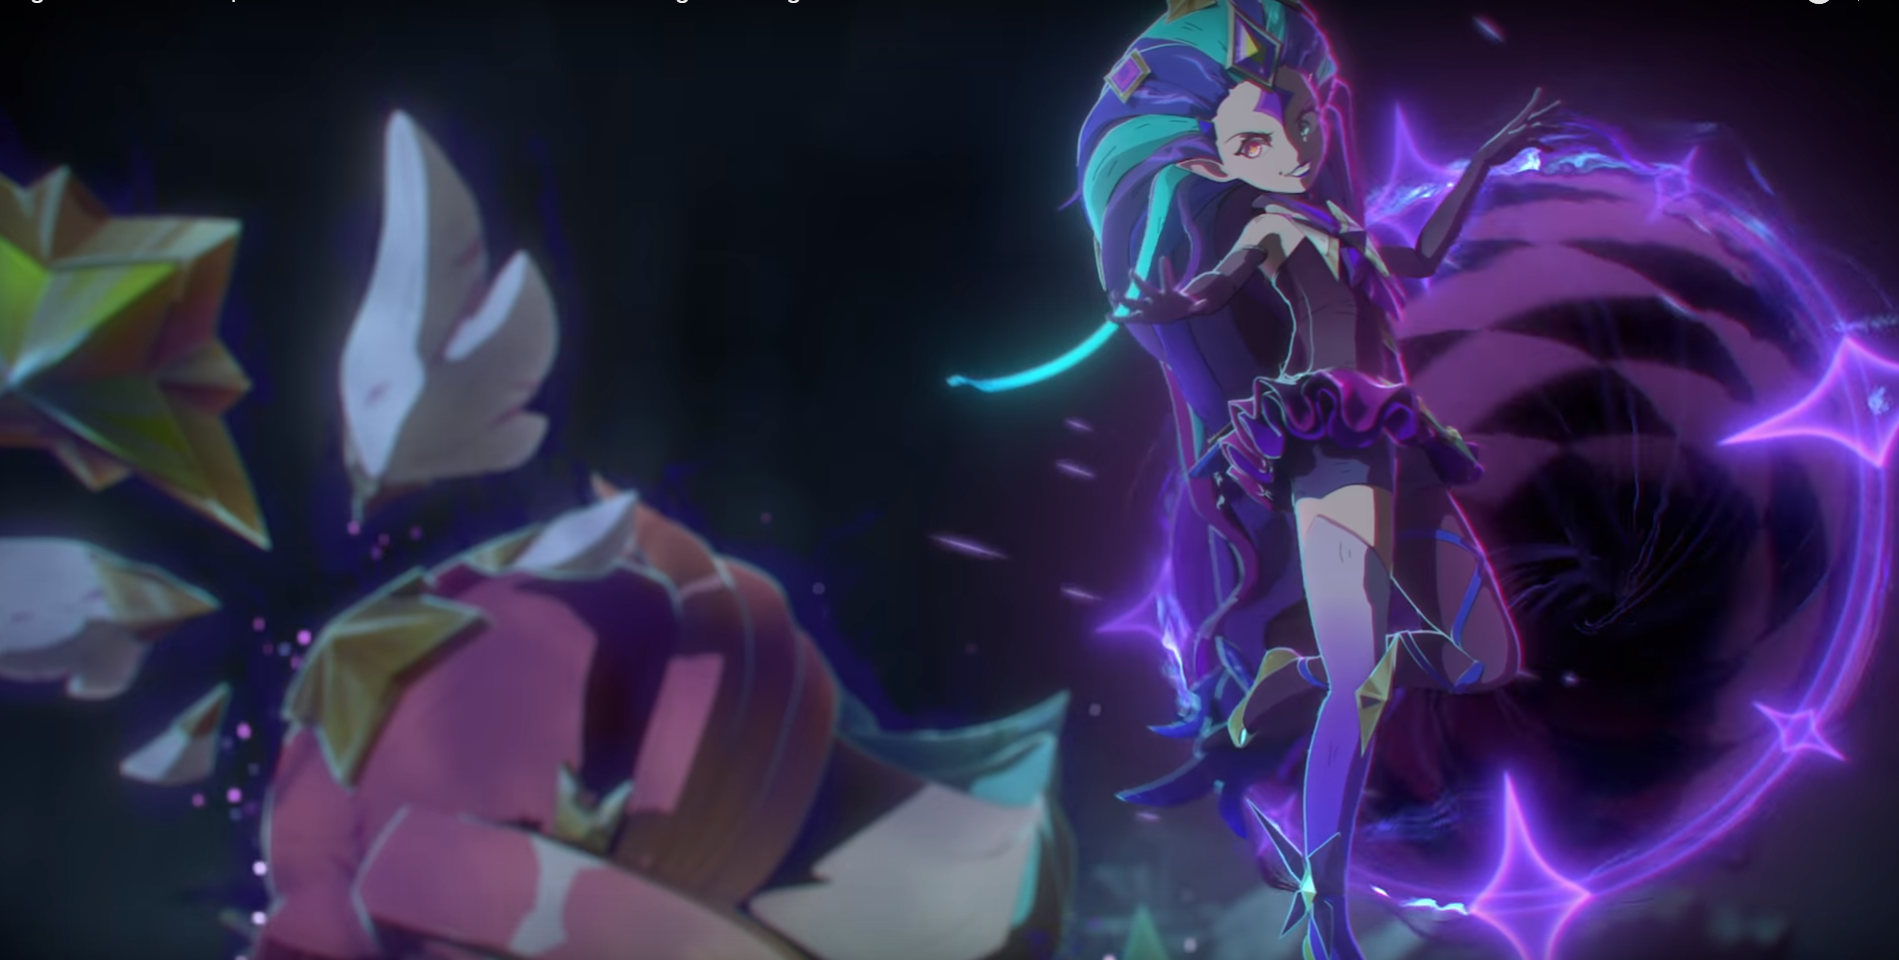 Star Guardian Zoe emerges from a purple portal and attempts to corrupt Neeko while floating just behind her